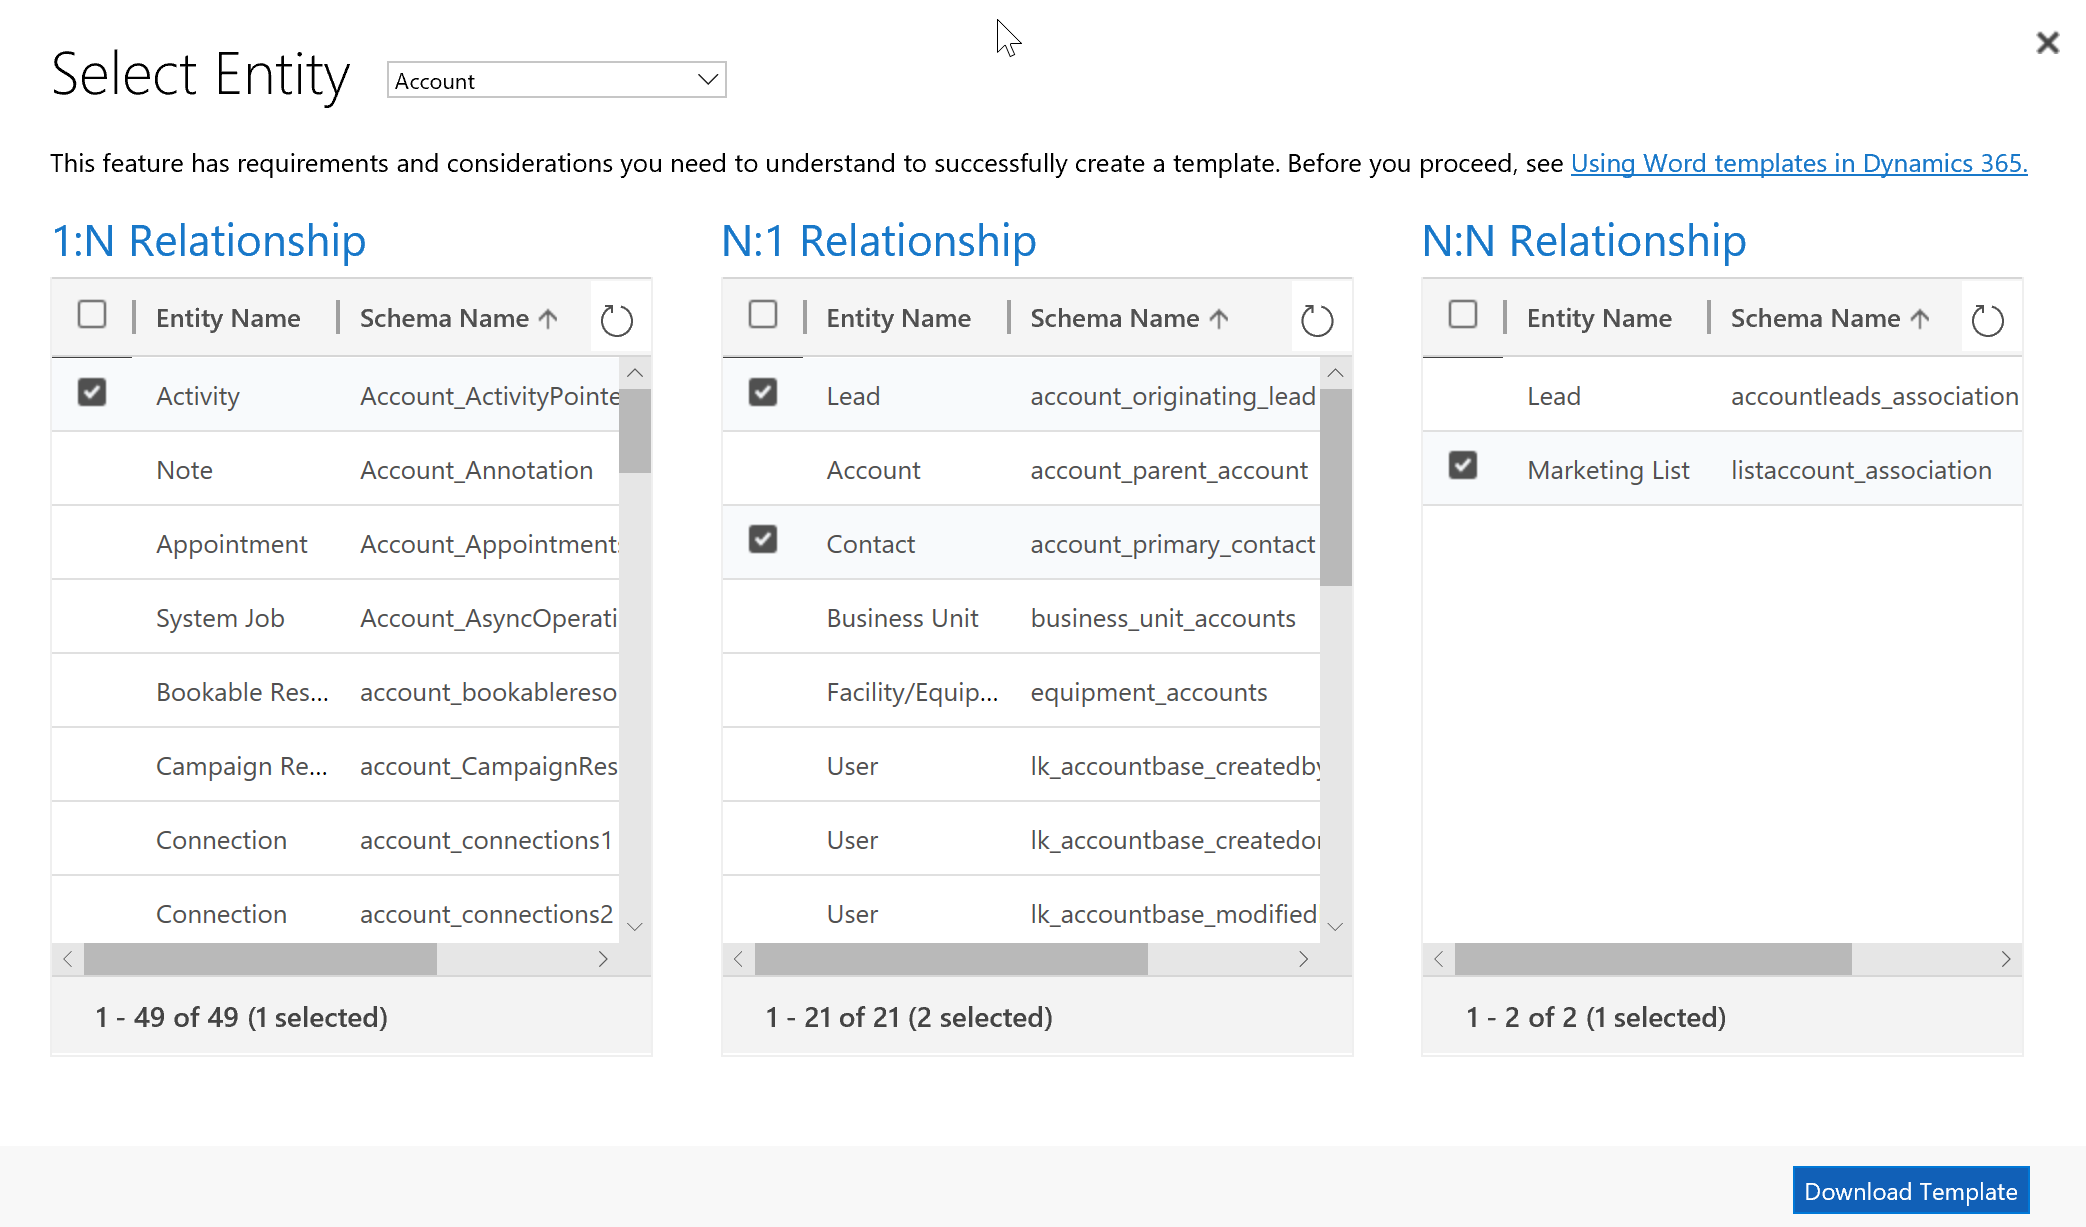 Screenshot of entity and relationship selection for creating a template